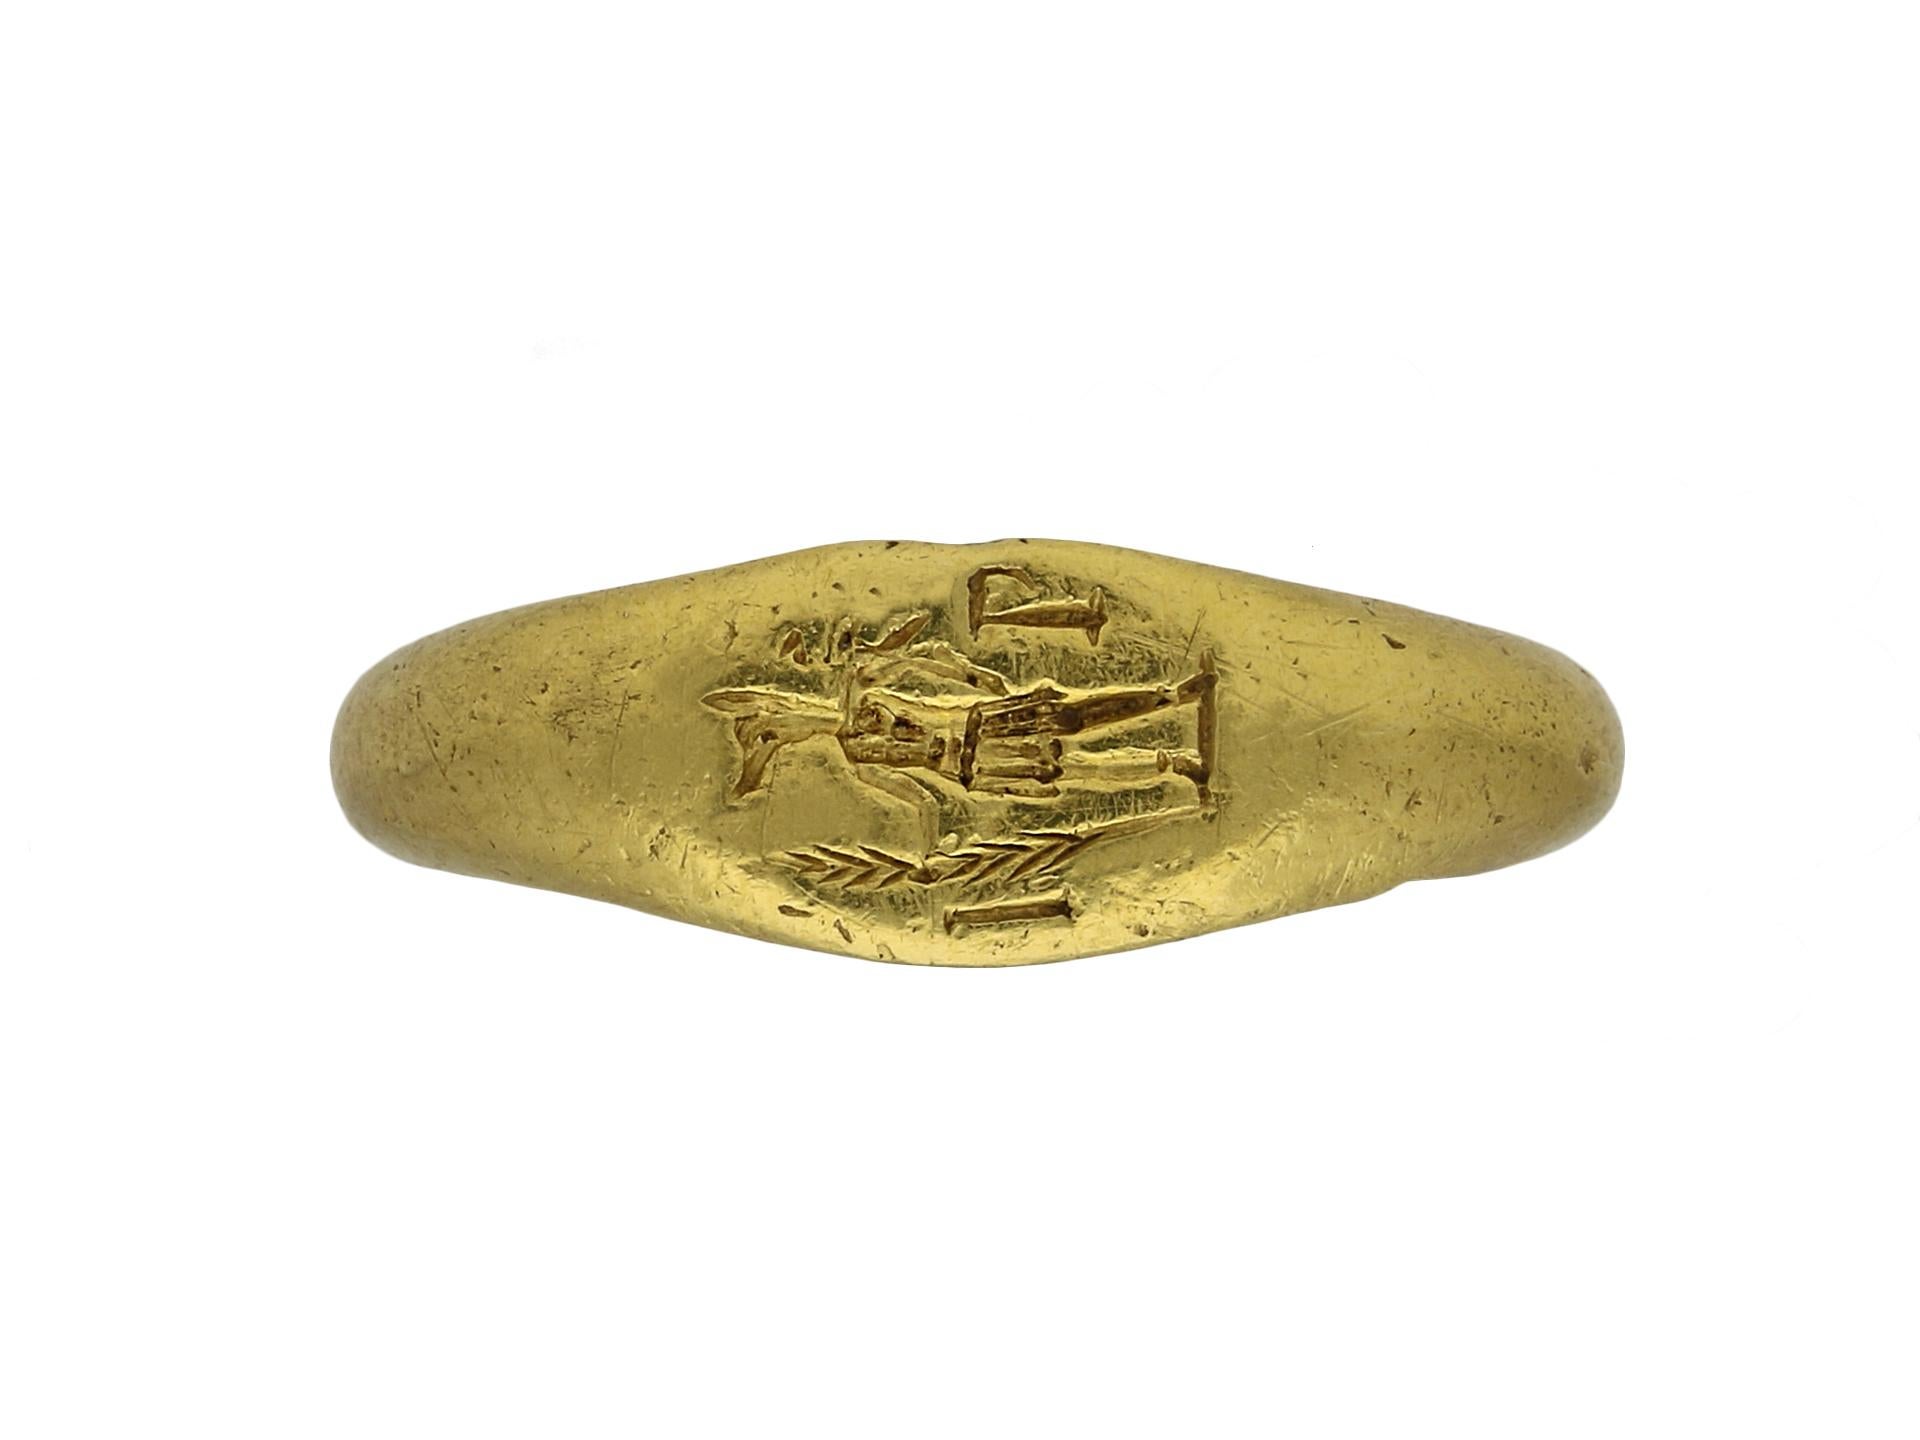 Ancient Roman signet ring.  A yellow gold ring composed of an oval bezel engraved with a full-length figure of Hermanubis in Roman dress holding a branch/staff, and flanked by the letters I and P, with integrated conforming shoulders flowing through